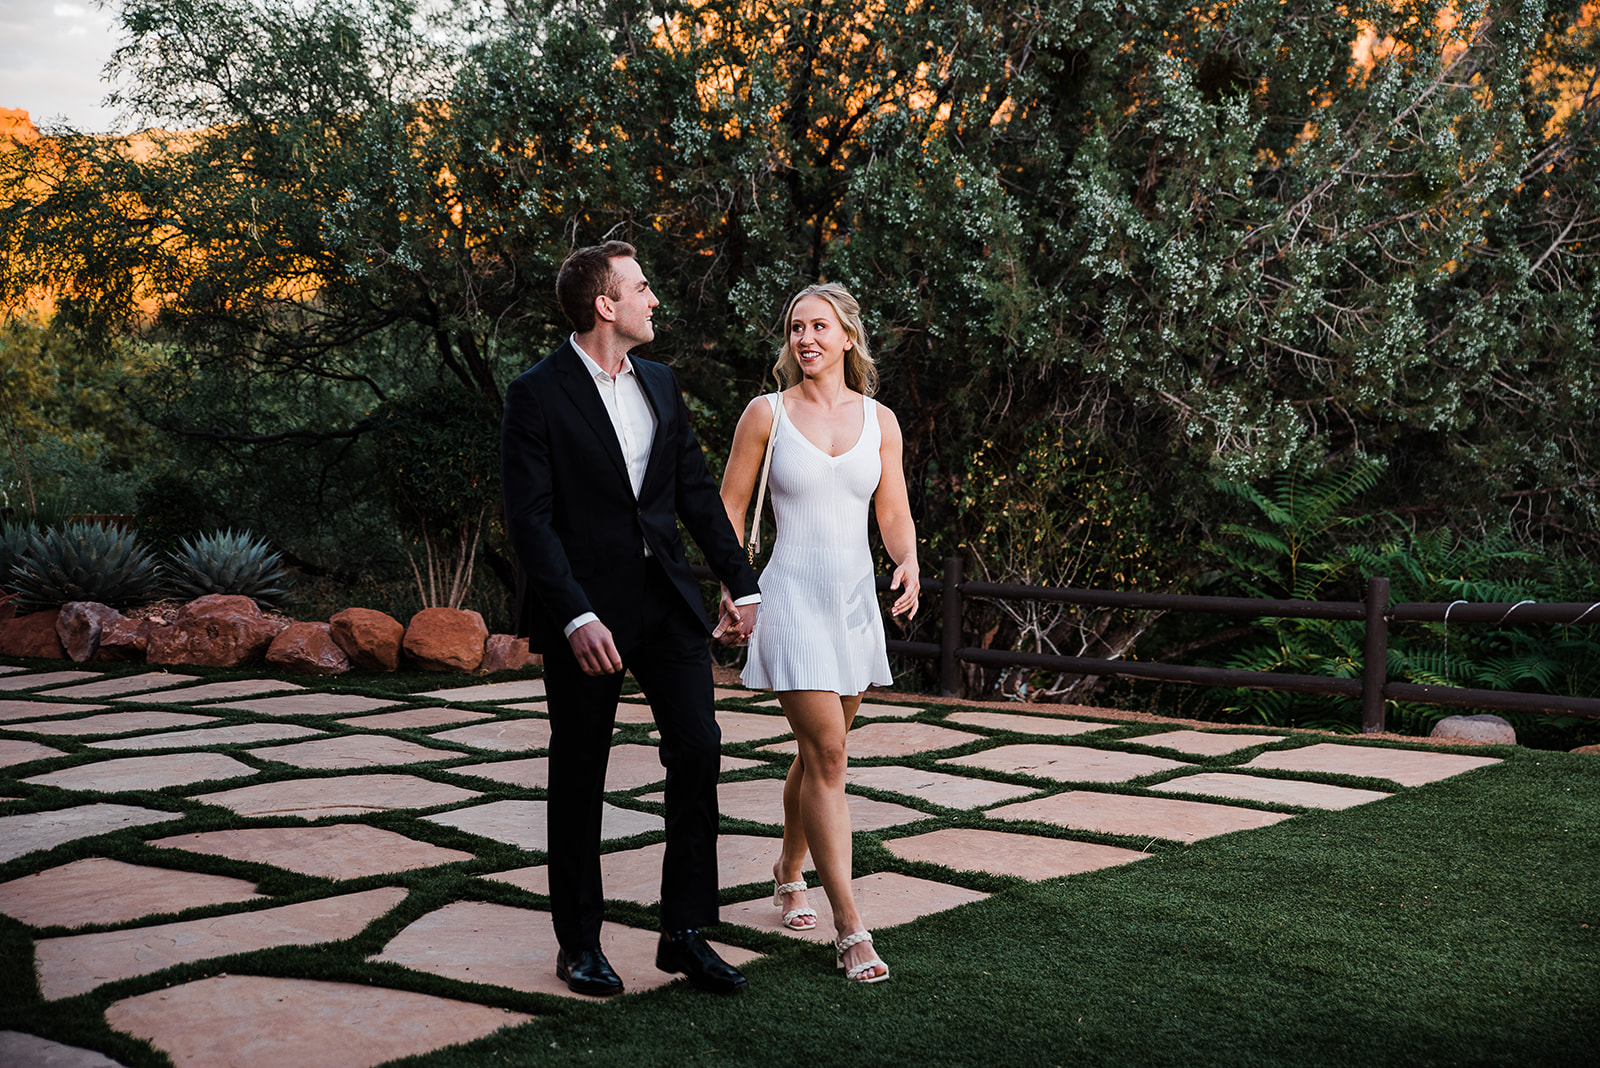 A man in a black suit walks through a manicured garden holding hands with his new fiance after a proposal